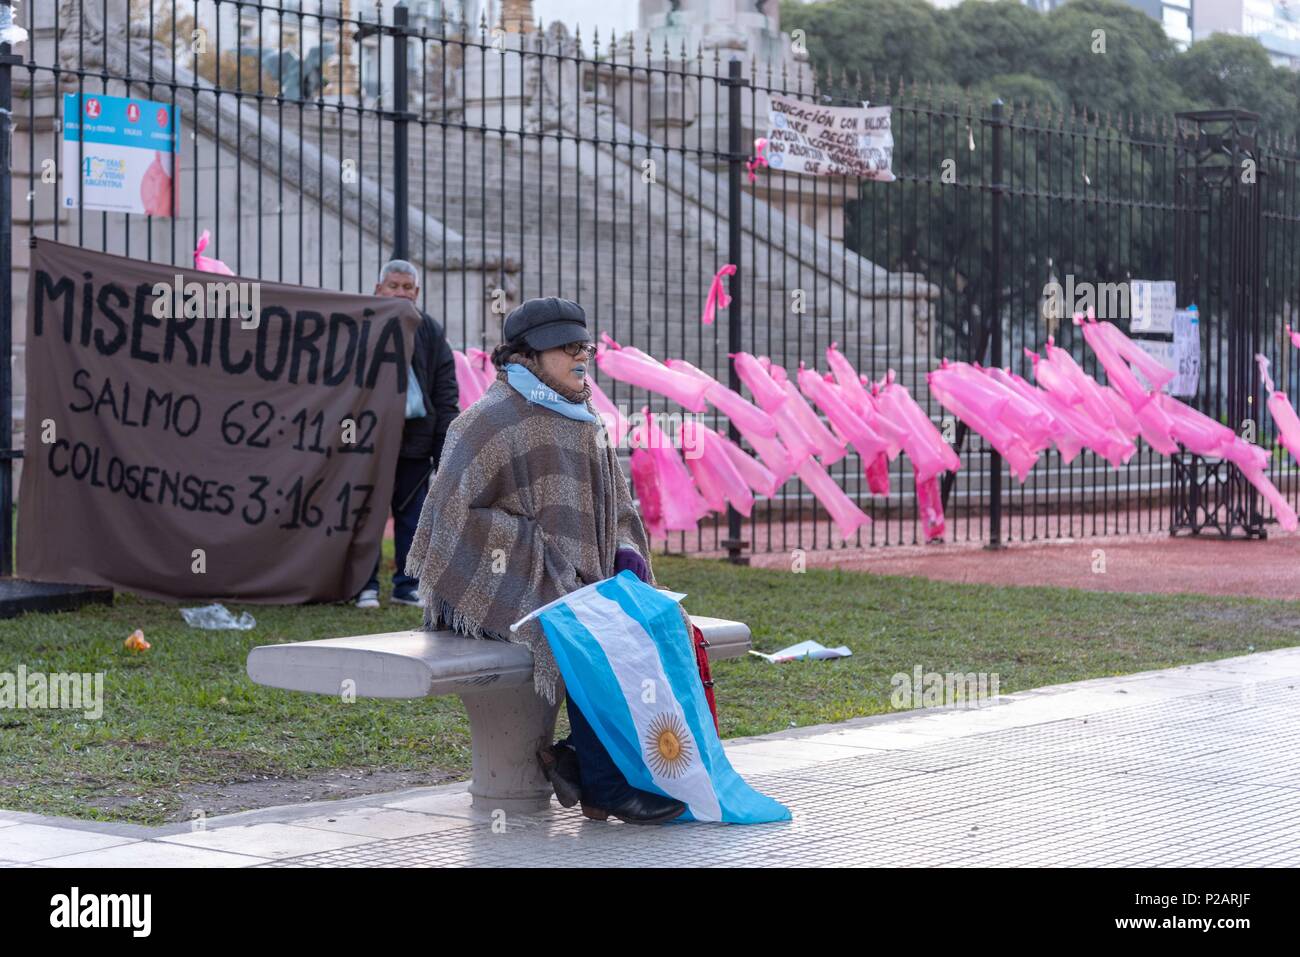 Buenos Aires, Argentina. 14th June, 2018. Jun 14, 2018 - Buenos Aires, Argentina - Chamber of Deputies narrowly approves legislation allowing abortions during the first 14 weeks of pregnancy.Argentine lawmakers approved a bill to legalize elective abortions following a heated debate over a proposal that would make the country the first major Latin American nation to ease strict antiabortion laws.After a session lasting more than 22 hours, the lower house of Congress voted 129 versus 125 in favor of legislation to allow abortions during the first 14 weeks of pregnancy. (Credit Image: © Maximil Stock Photo